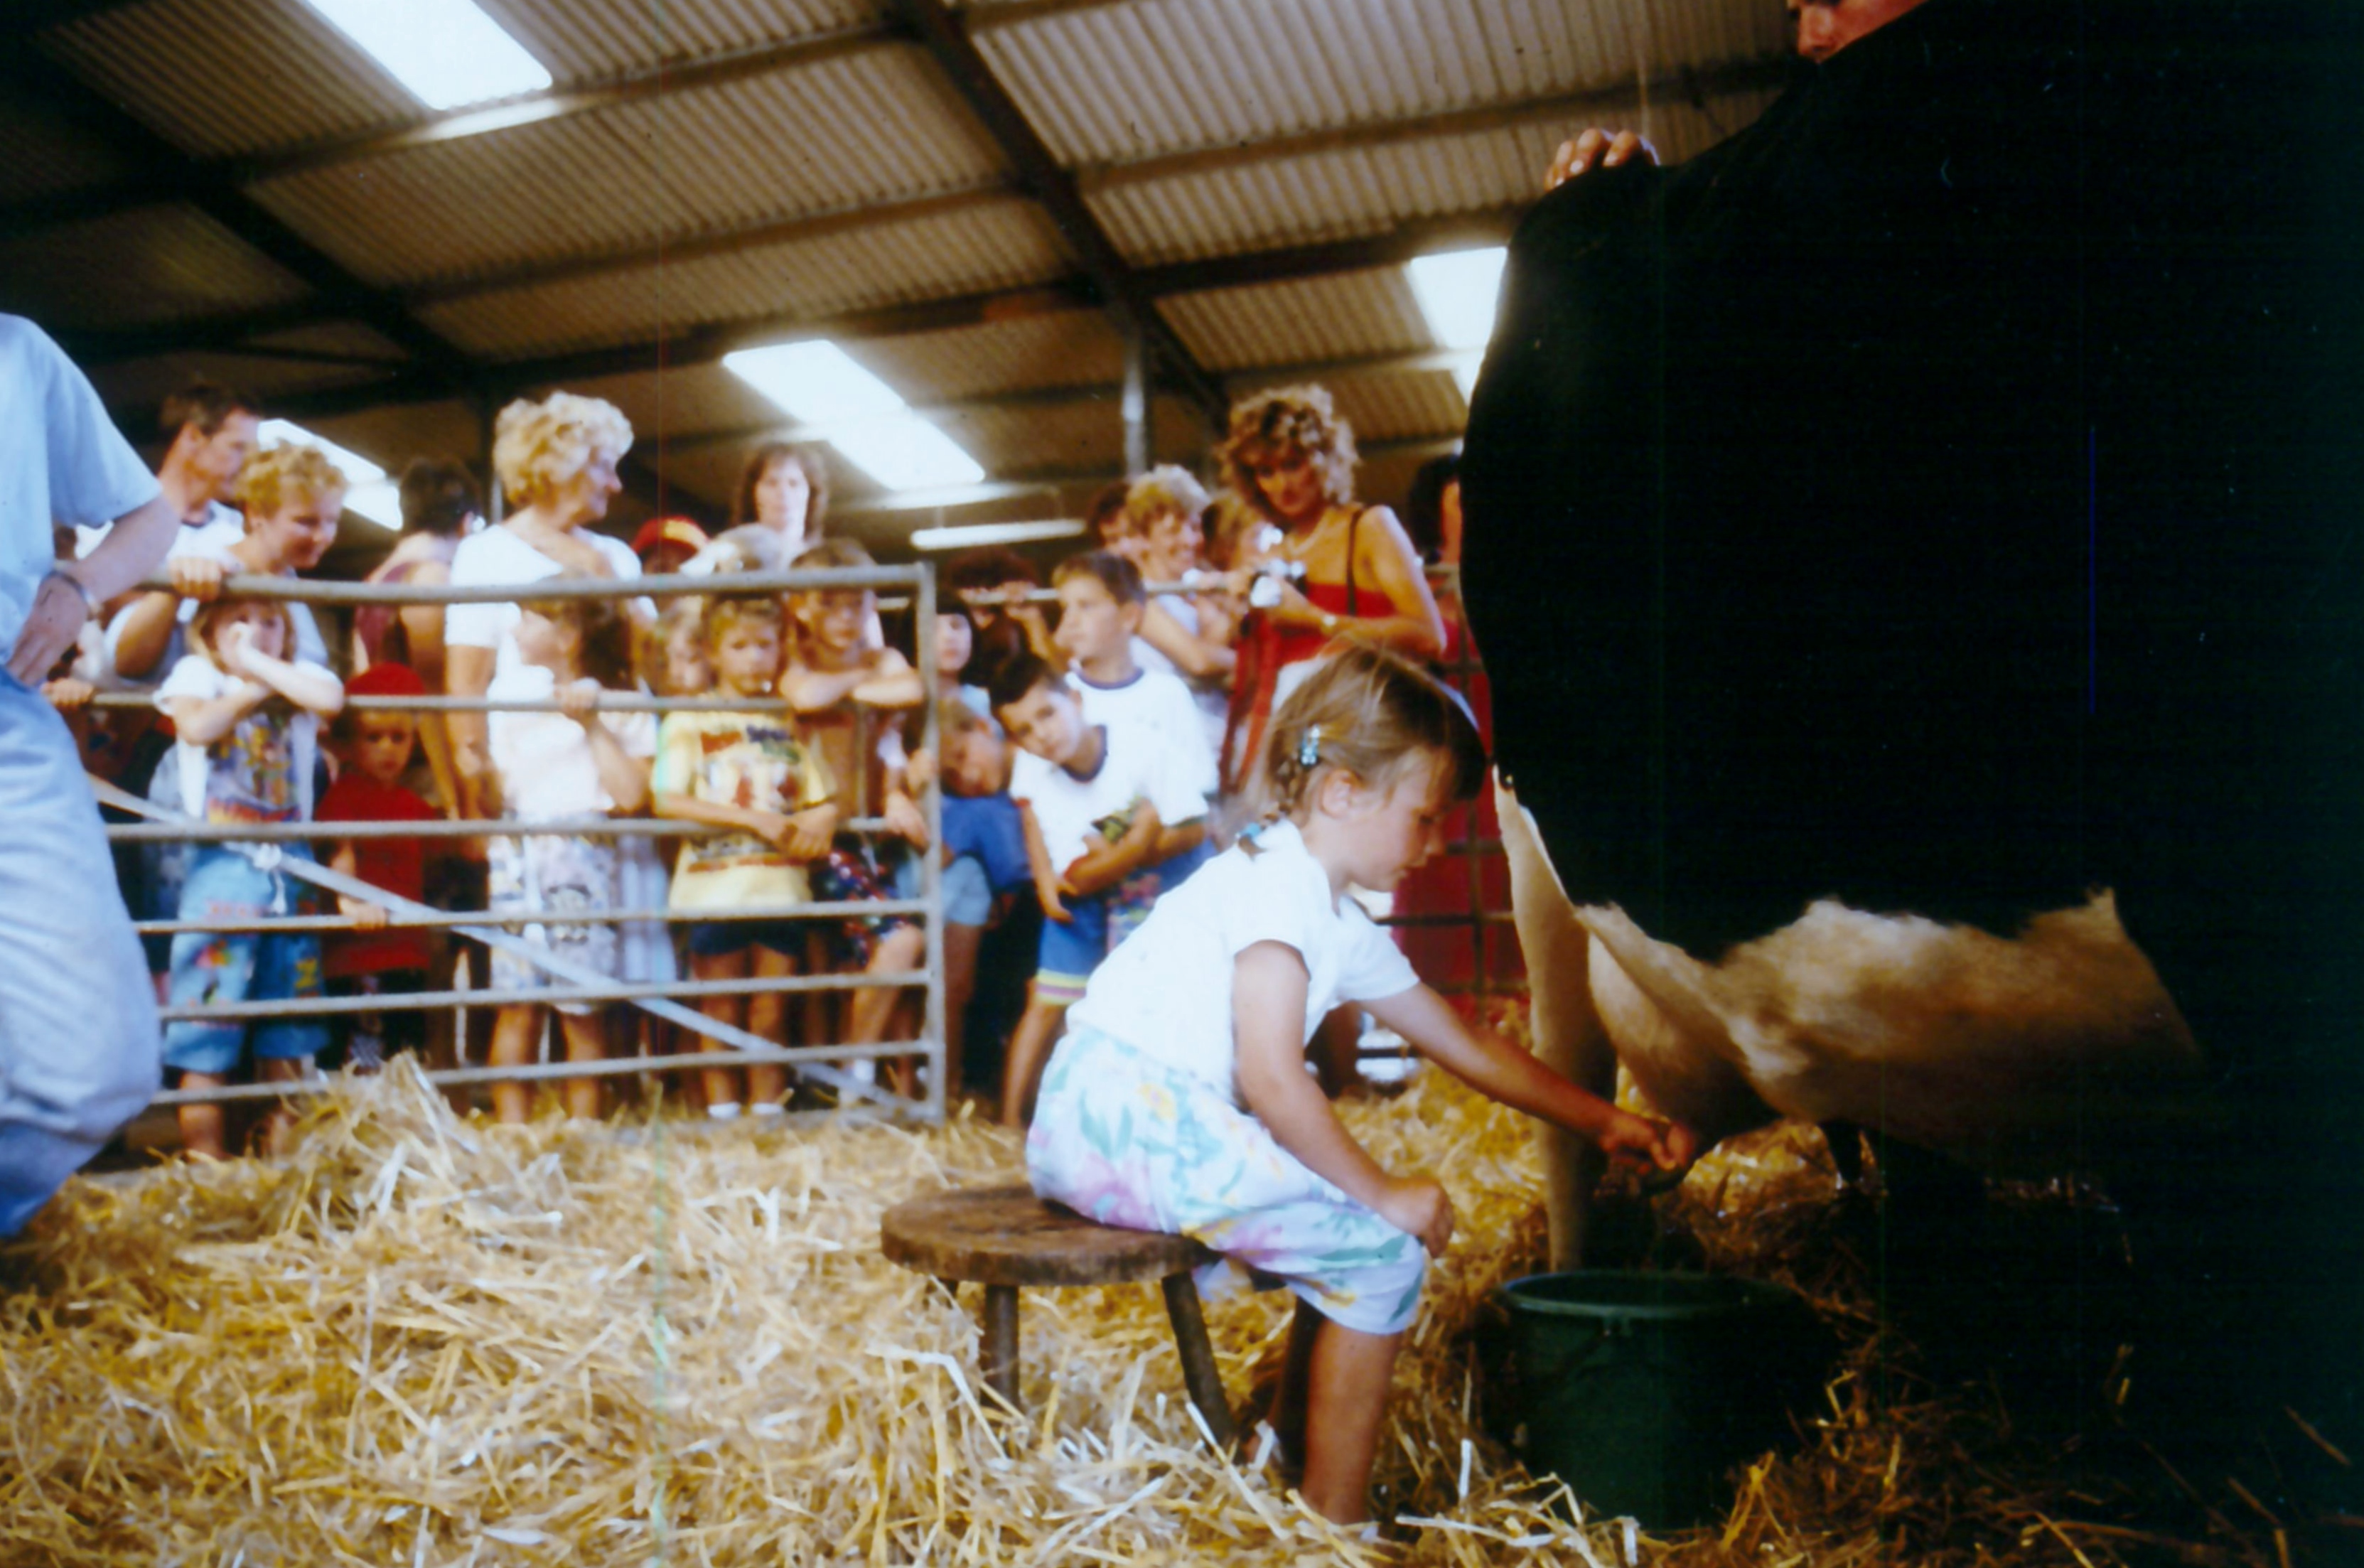 Visitor hand milking a cow at Folly Farm in the 1980s